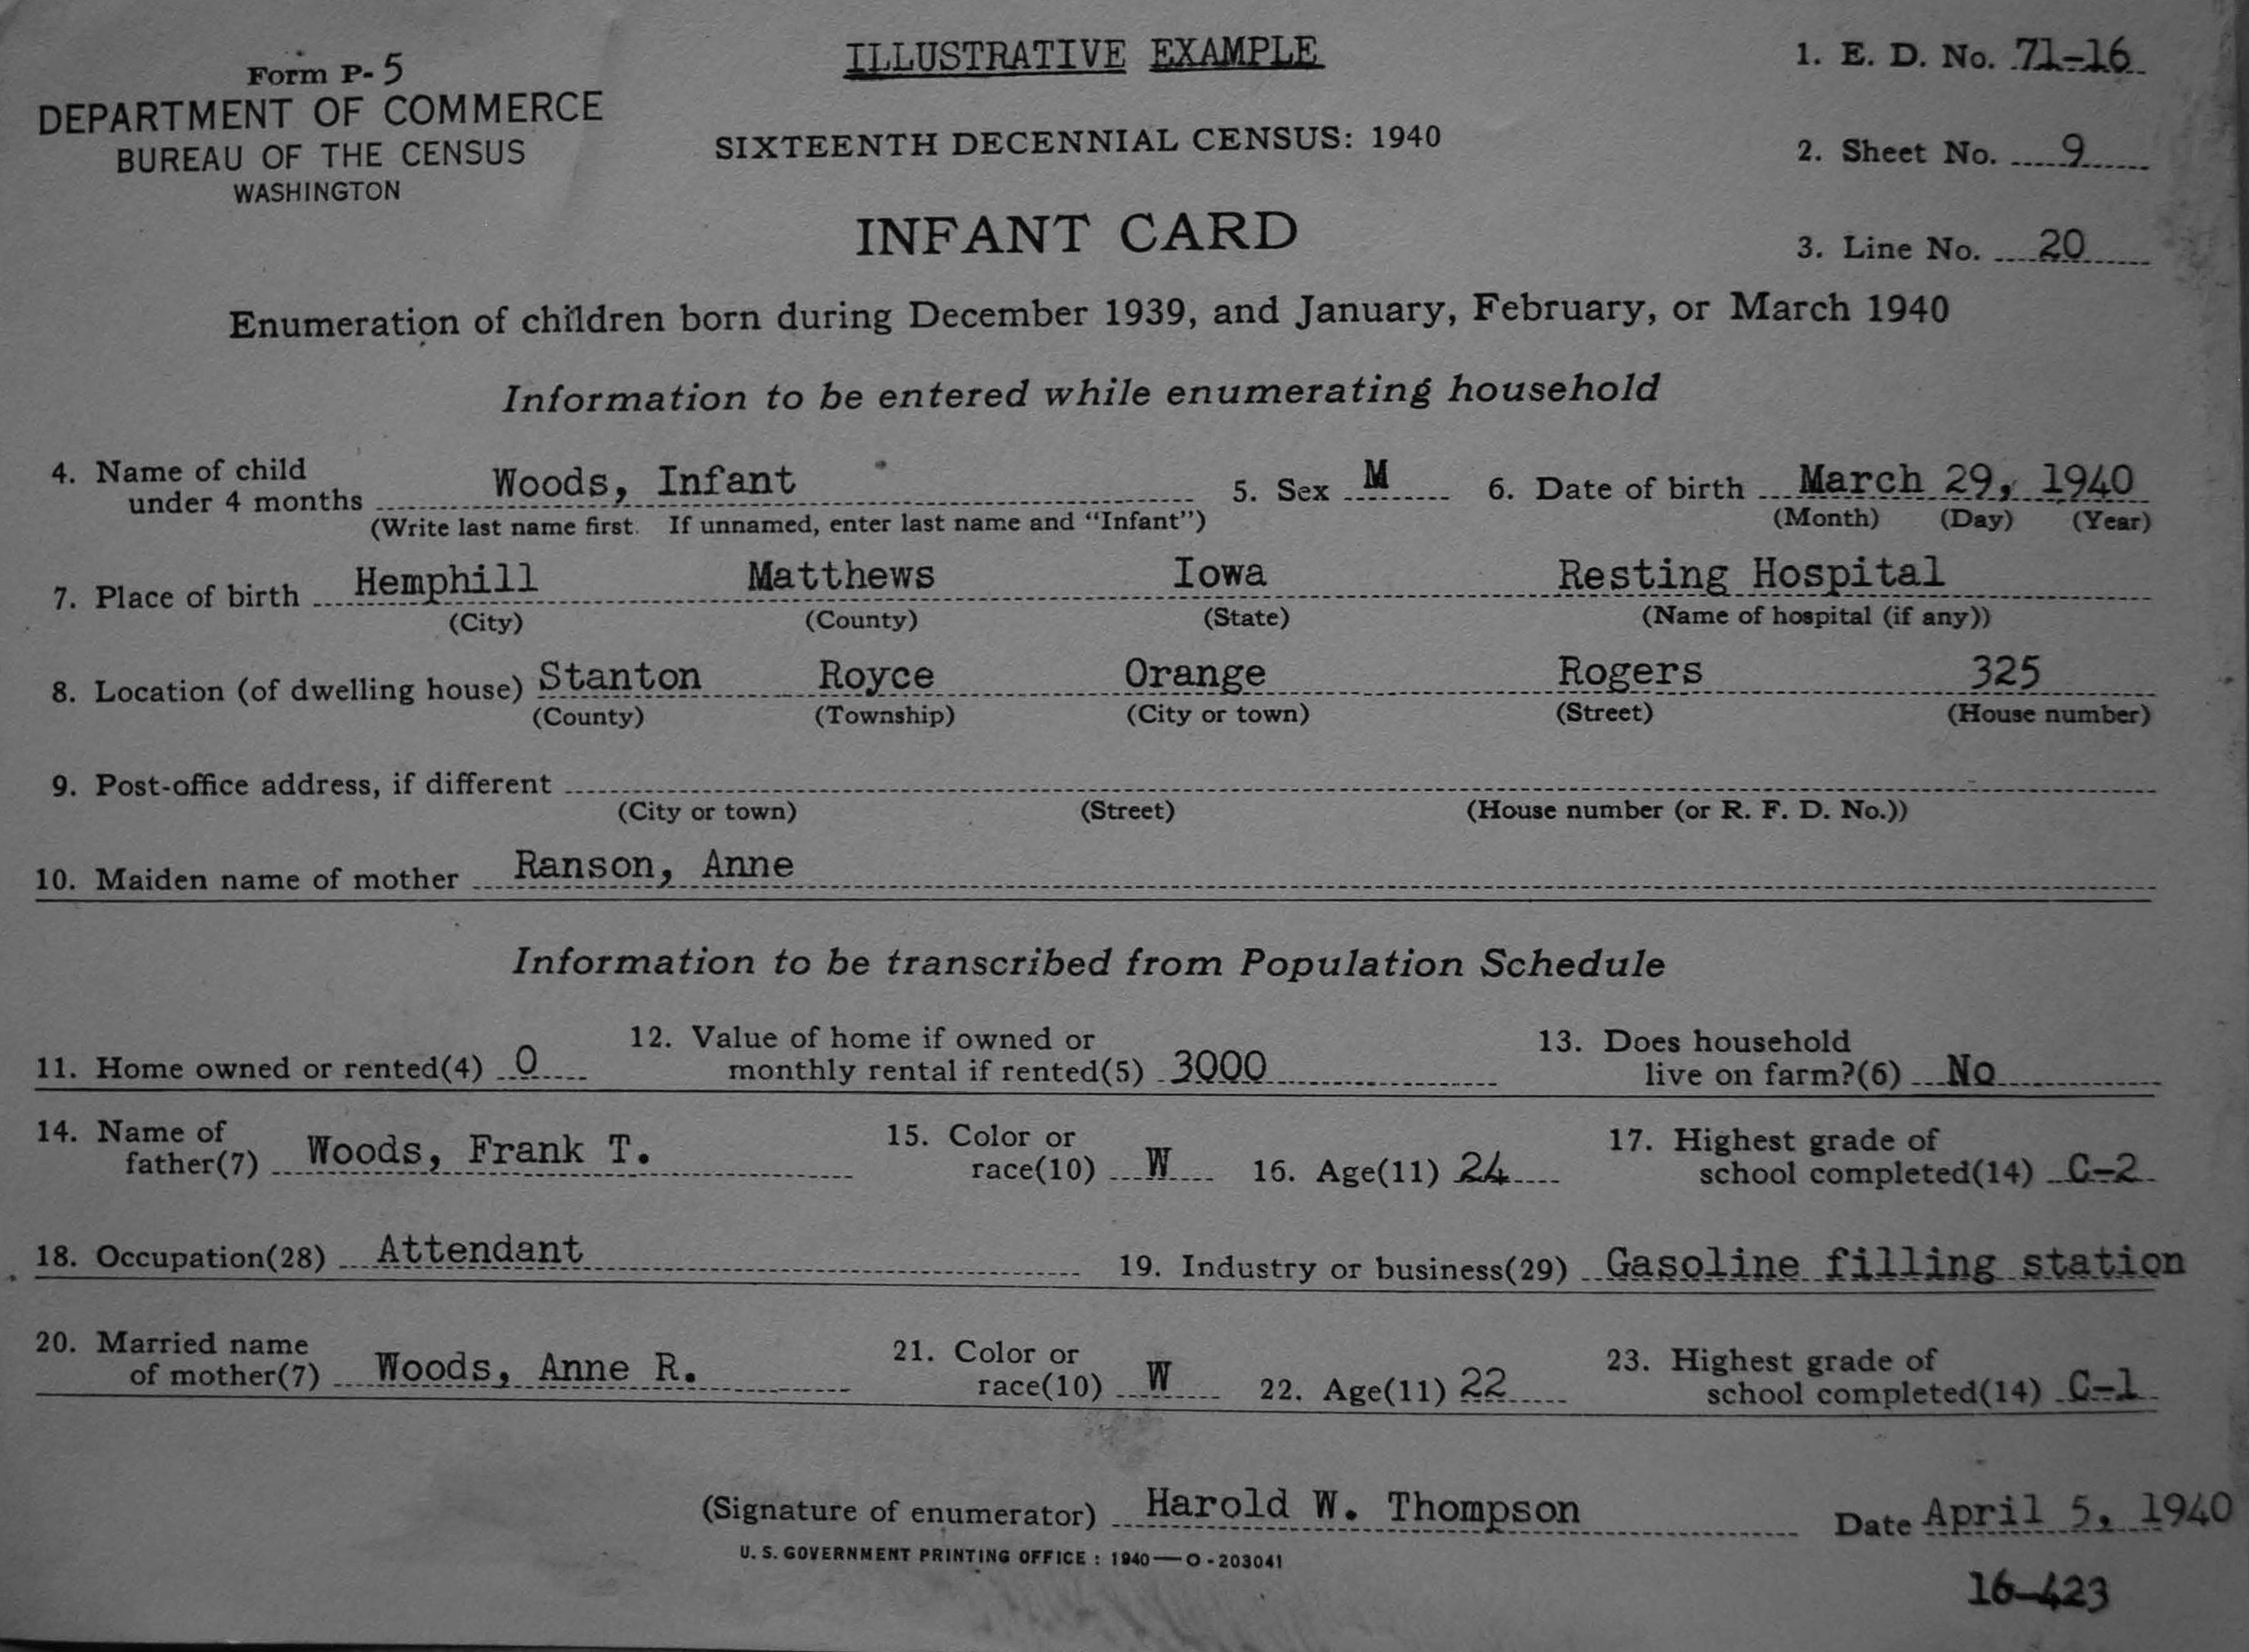 an illustrative example of a filled out Infant Card